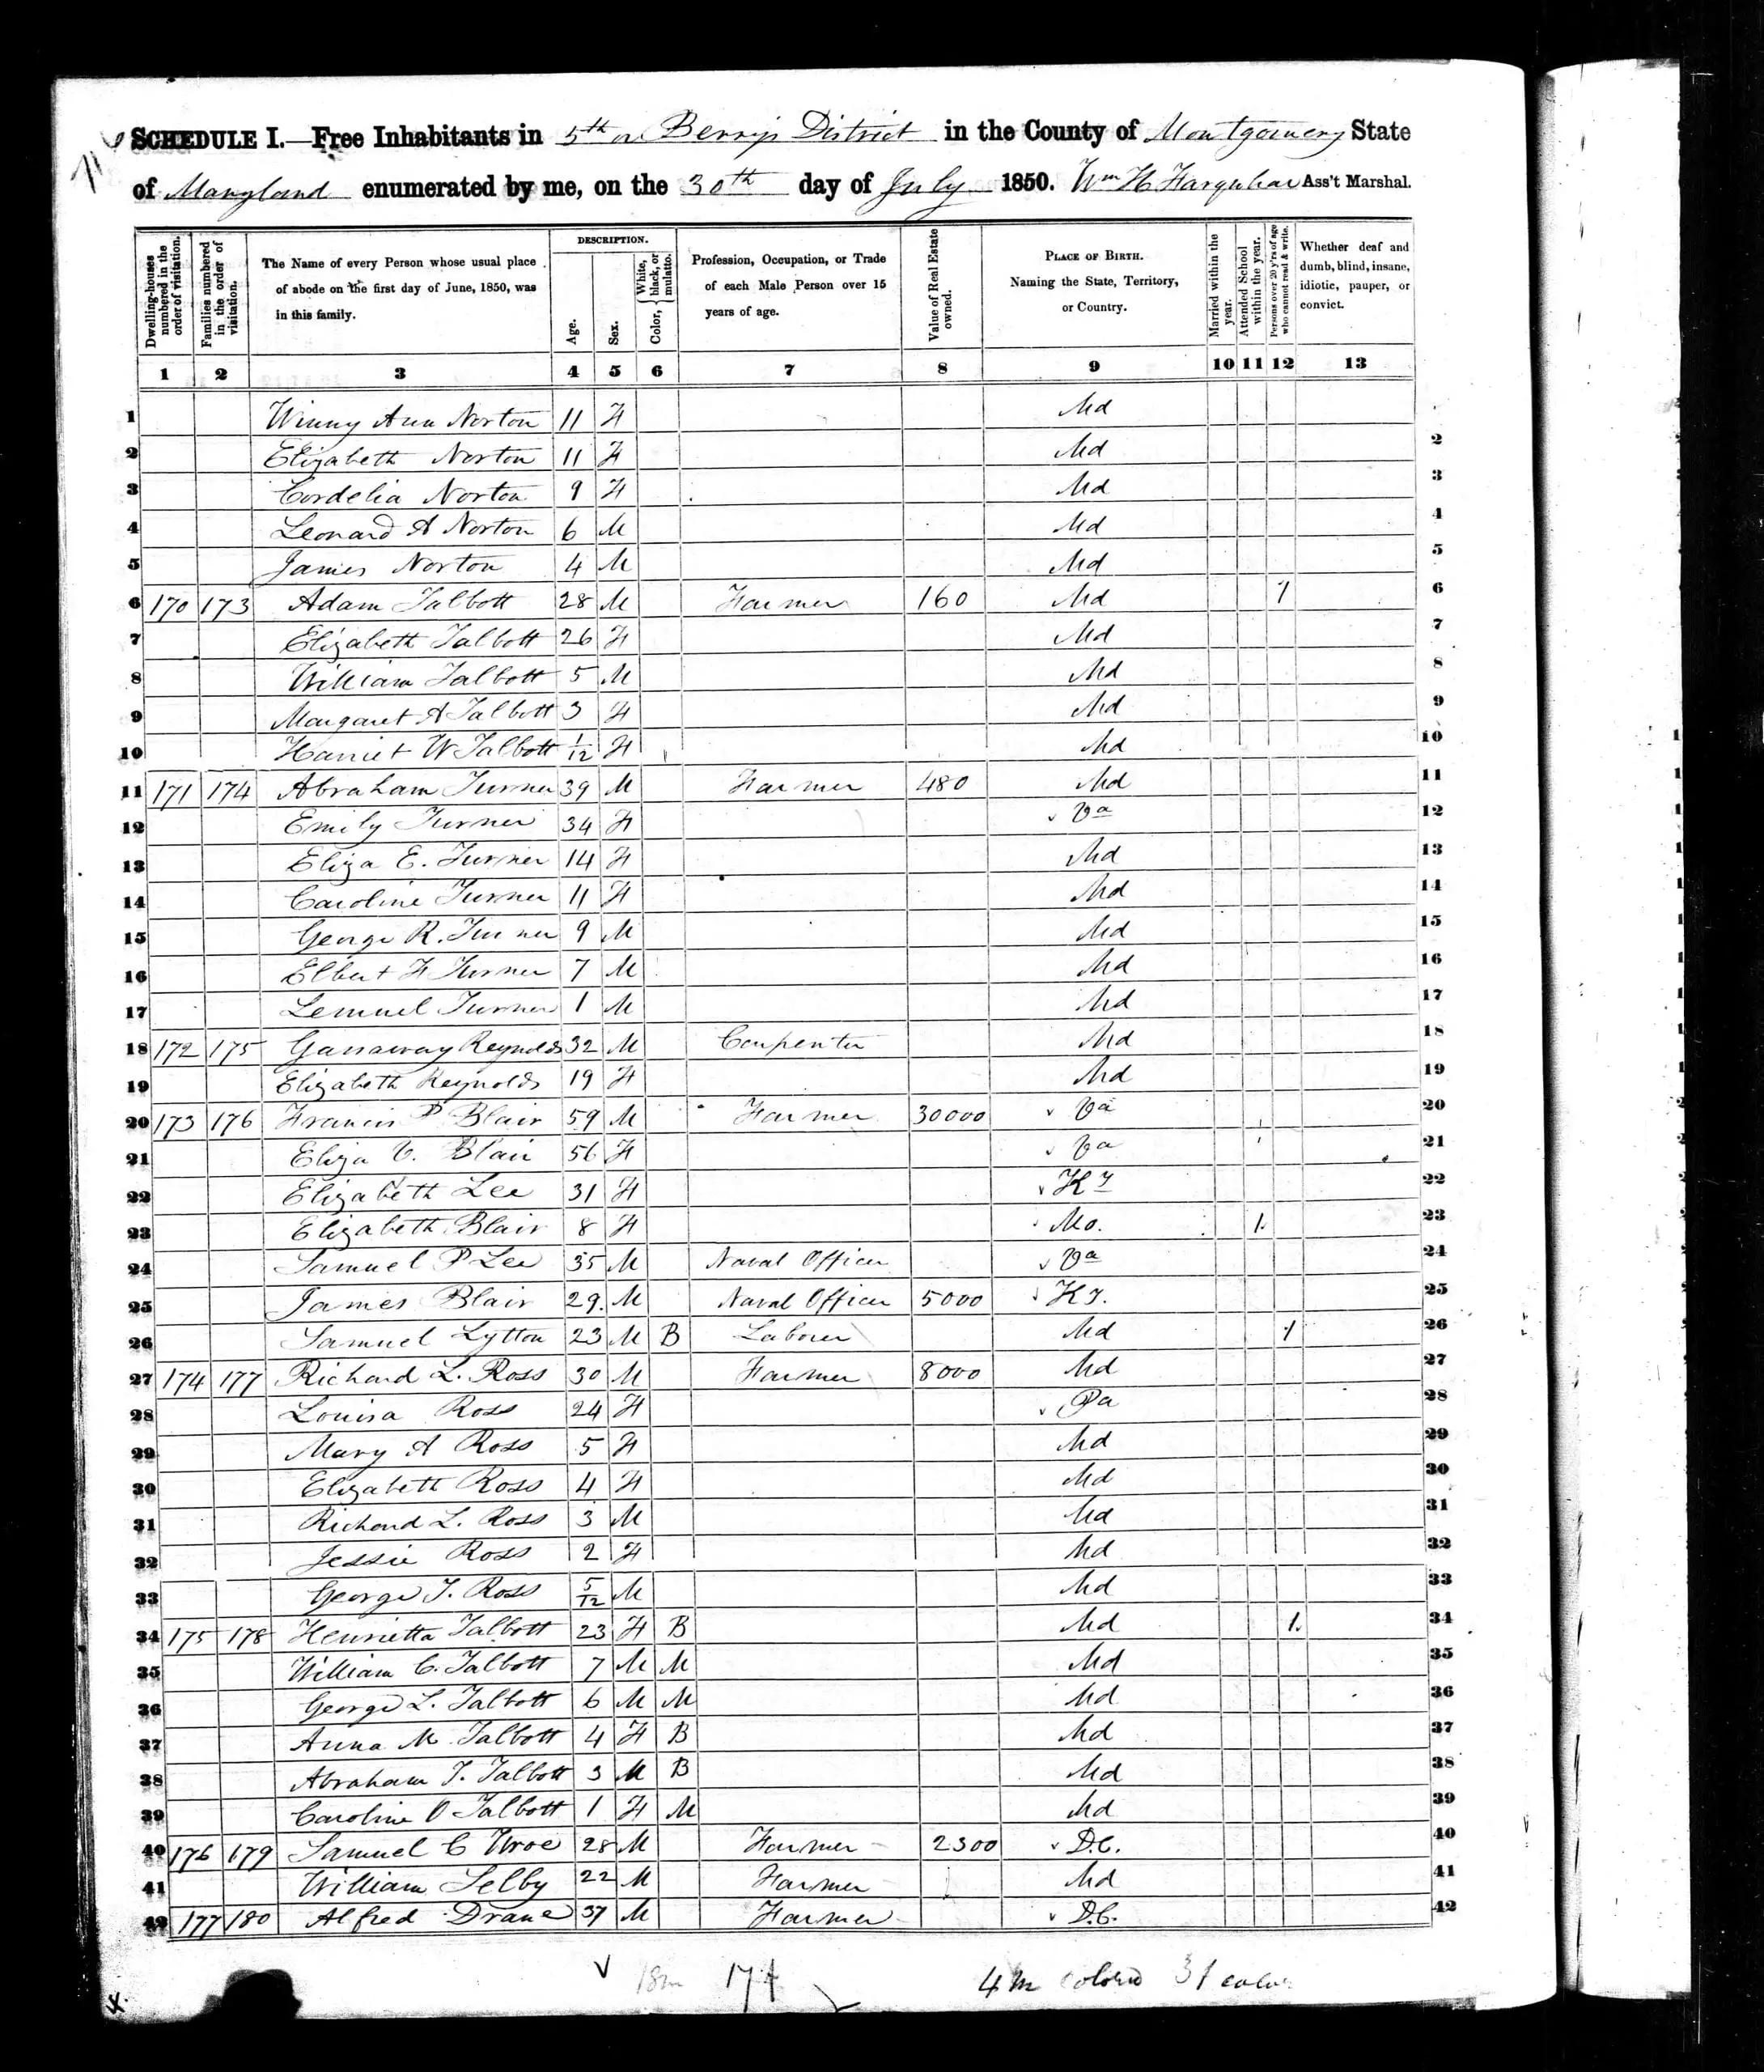 Blair family in the 1850 U.S. Census